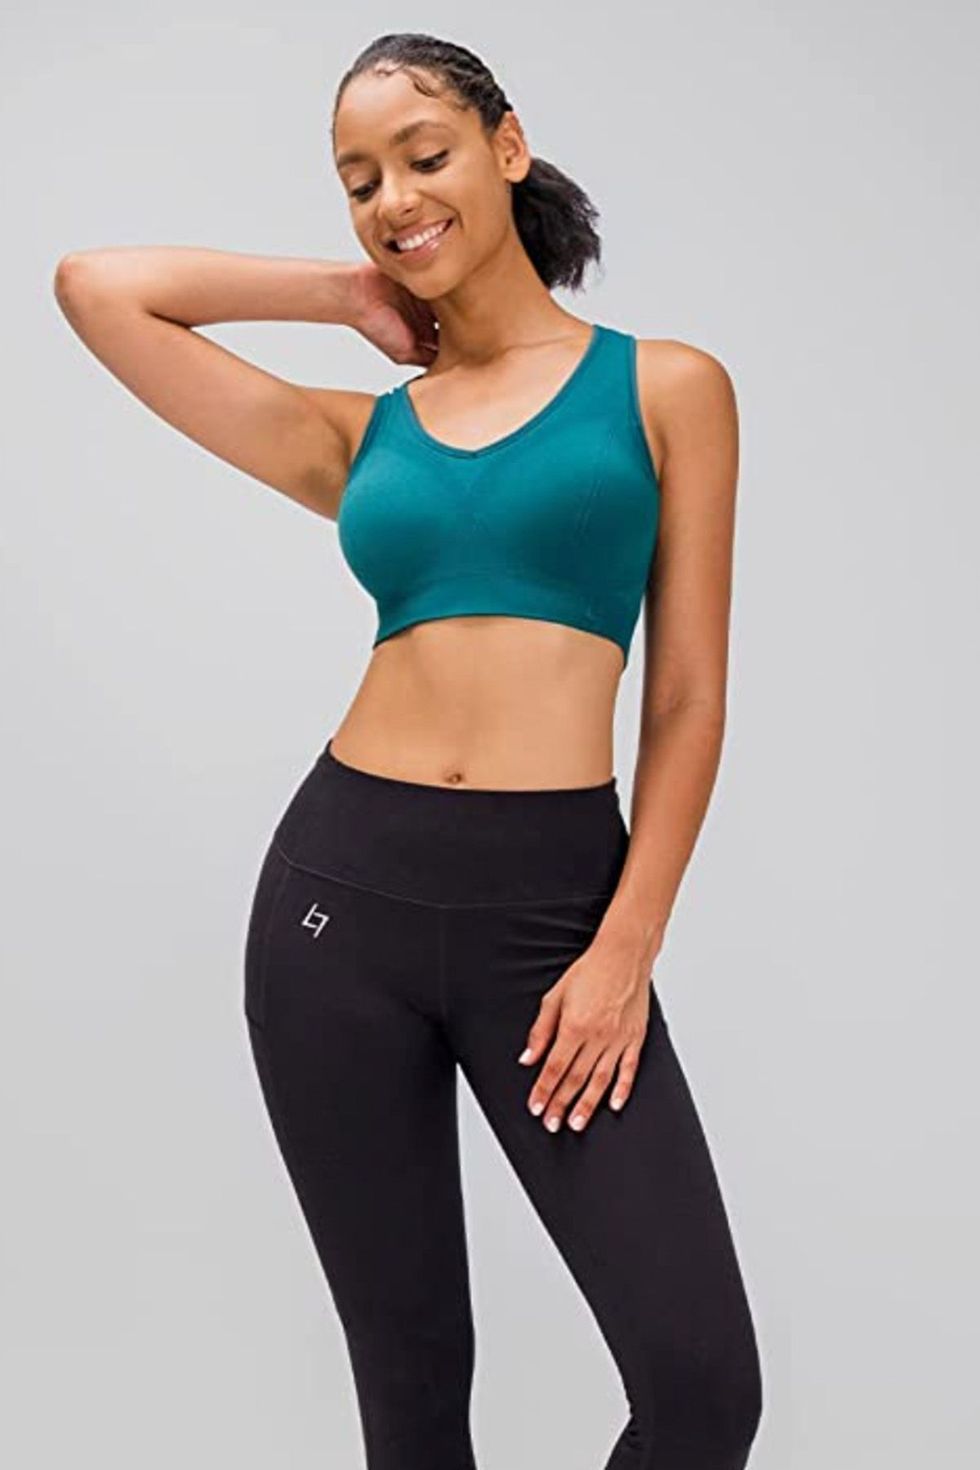 https://hips.hearstapps.com/vader-prod.s3.amazonaws.com/1641490644-fittin-racerback-sports-bras-for-women-padded-seamless-high-impact-support-for-yoga-gym-workout-fitness-1641488835.jpg?crop=1xw:1xh;center,top&resize=980:*